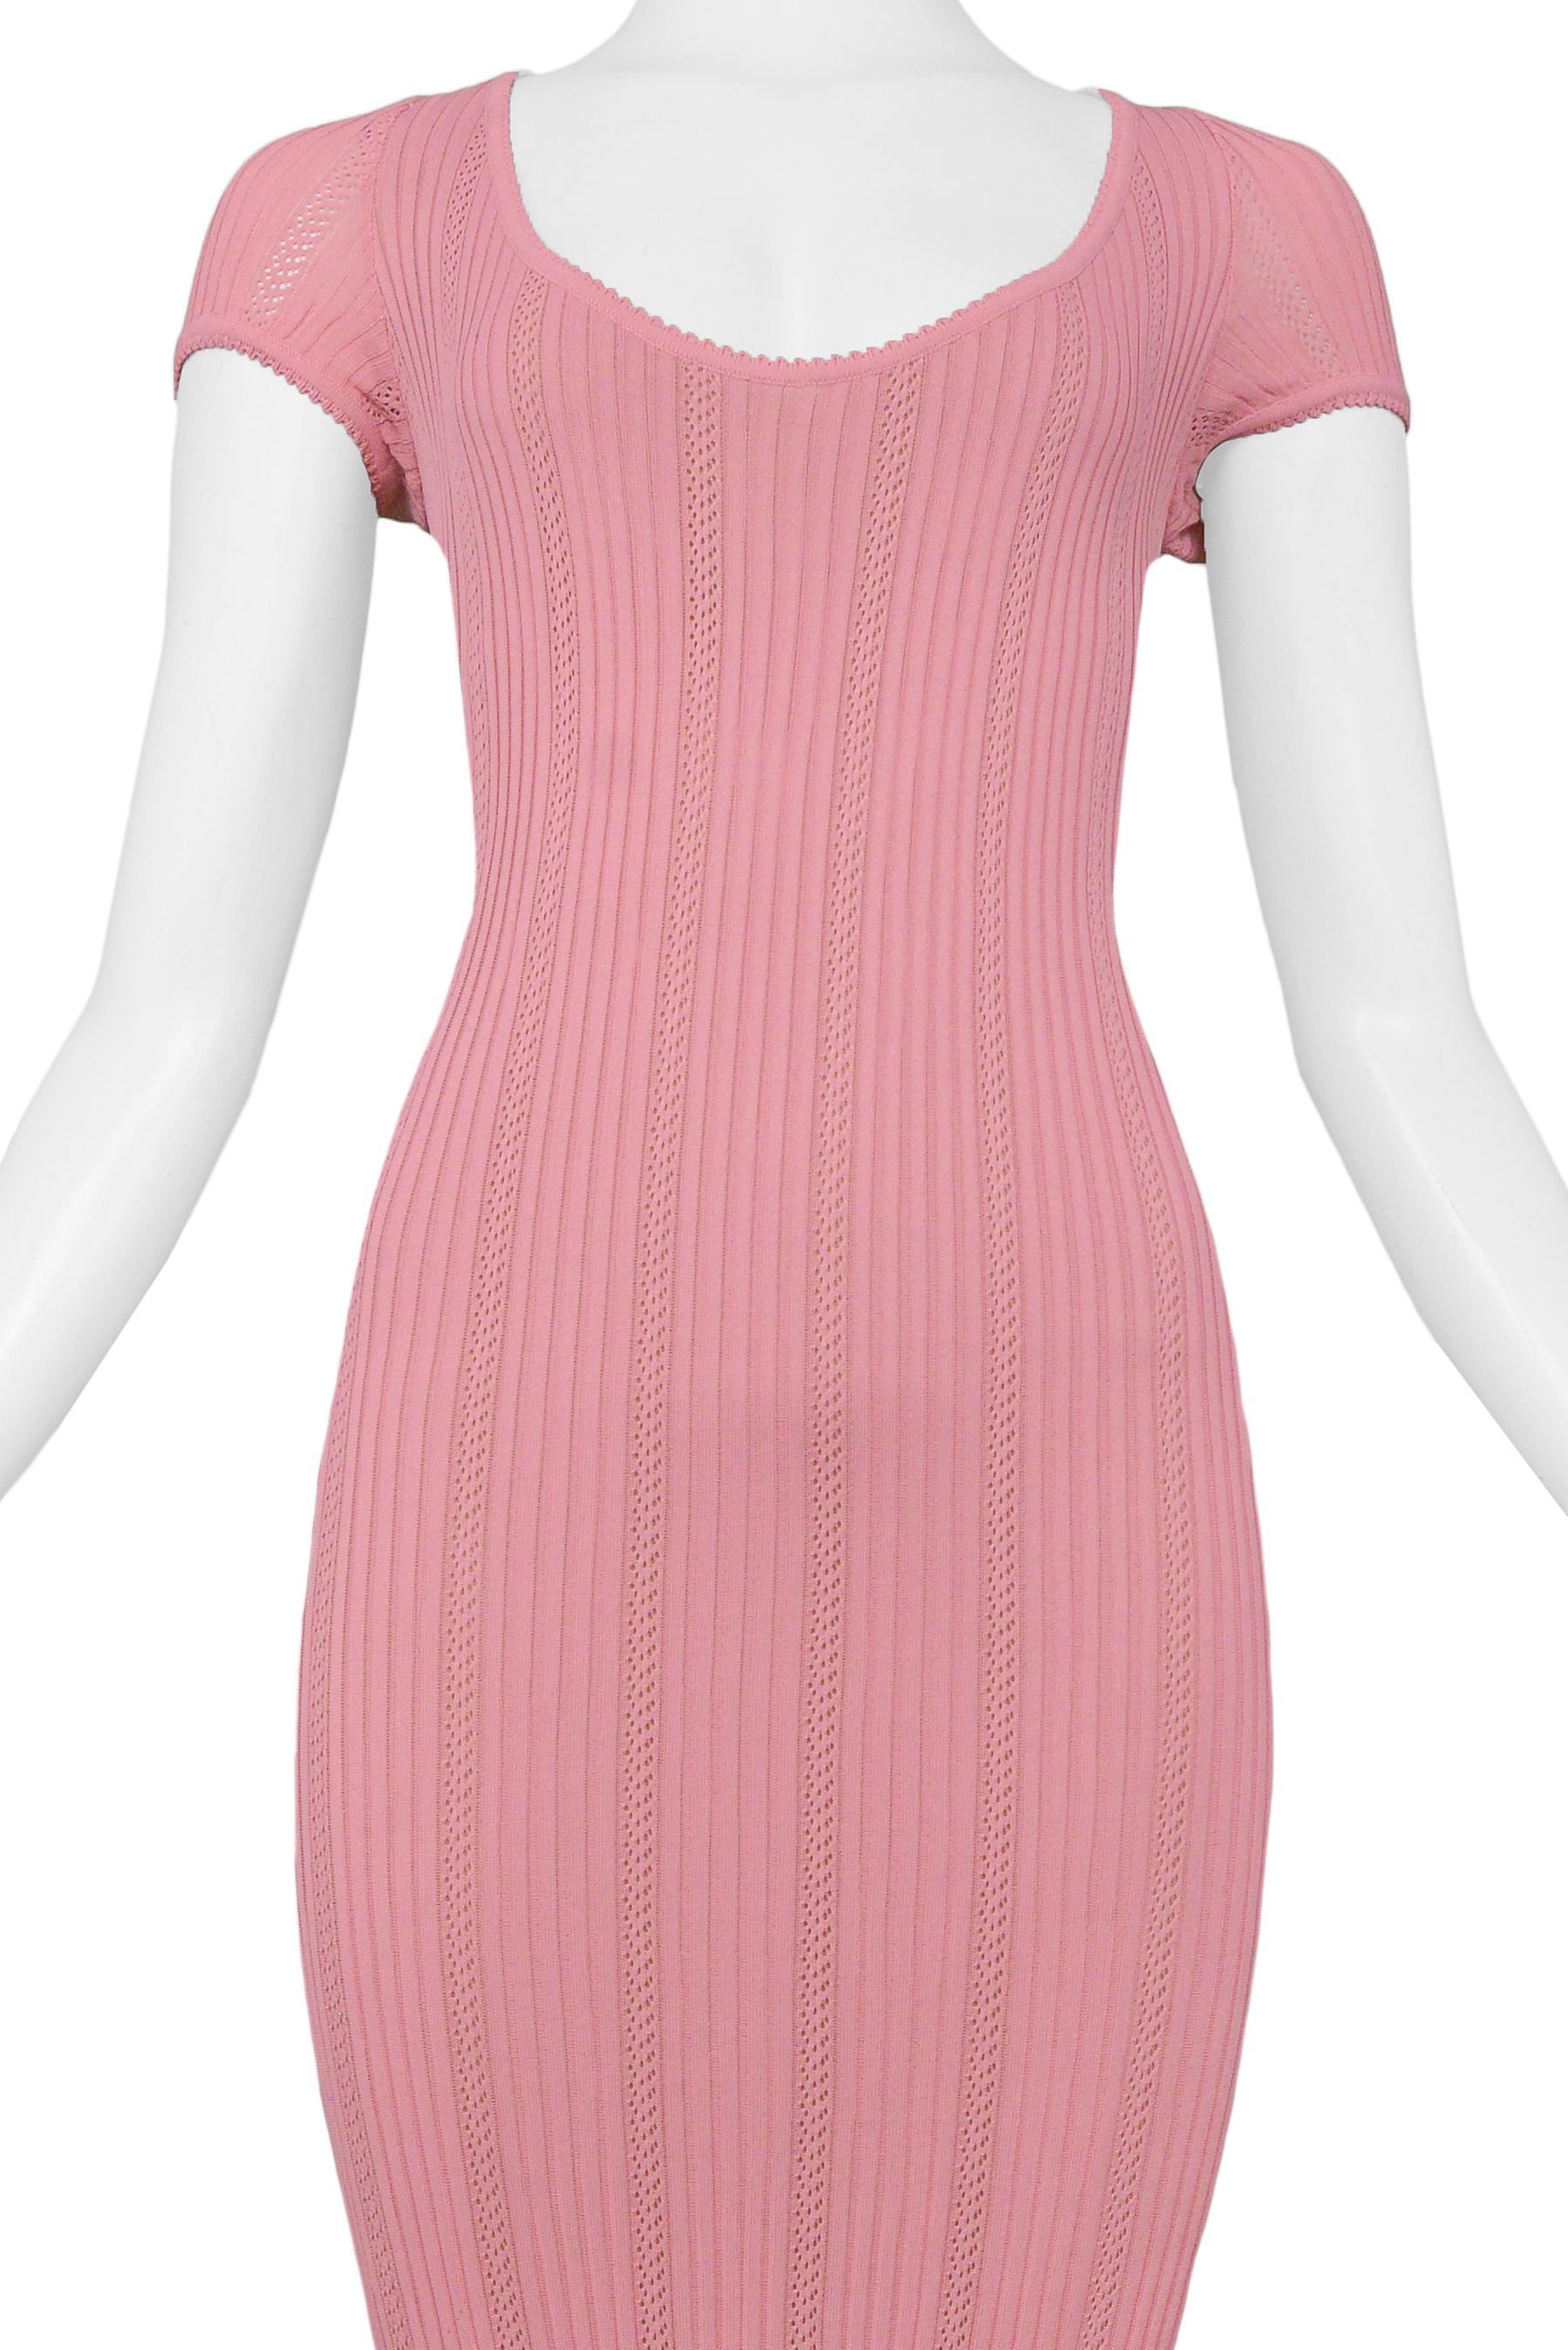 Alaia Pink Knit Bodycon Mermaid Dress SS 1996 For Sale 1